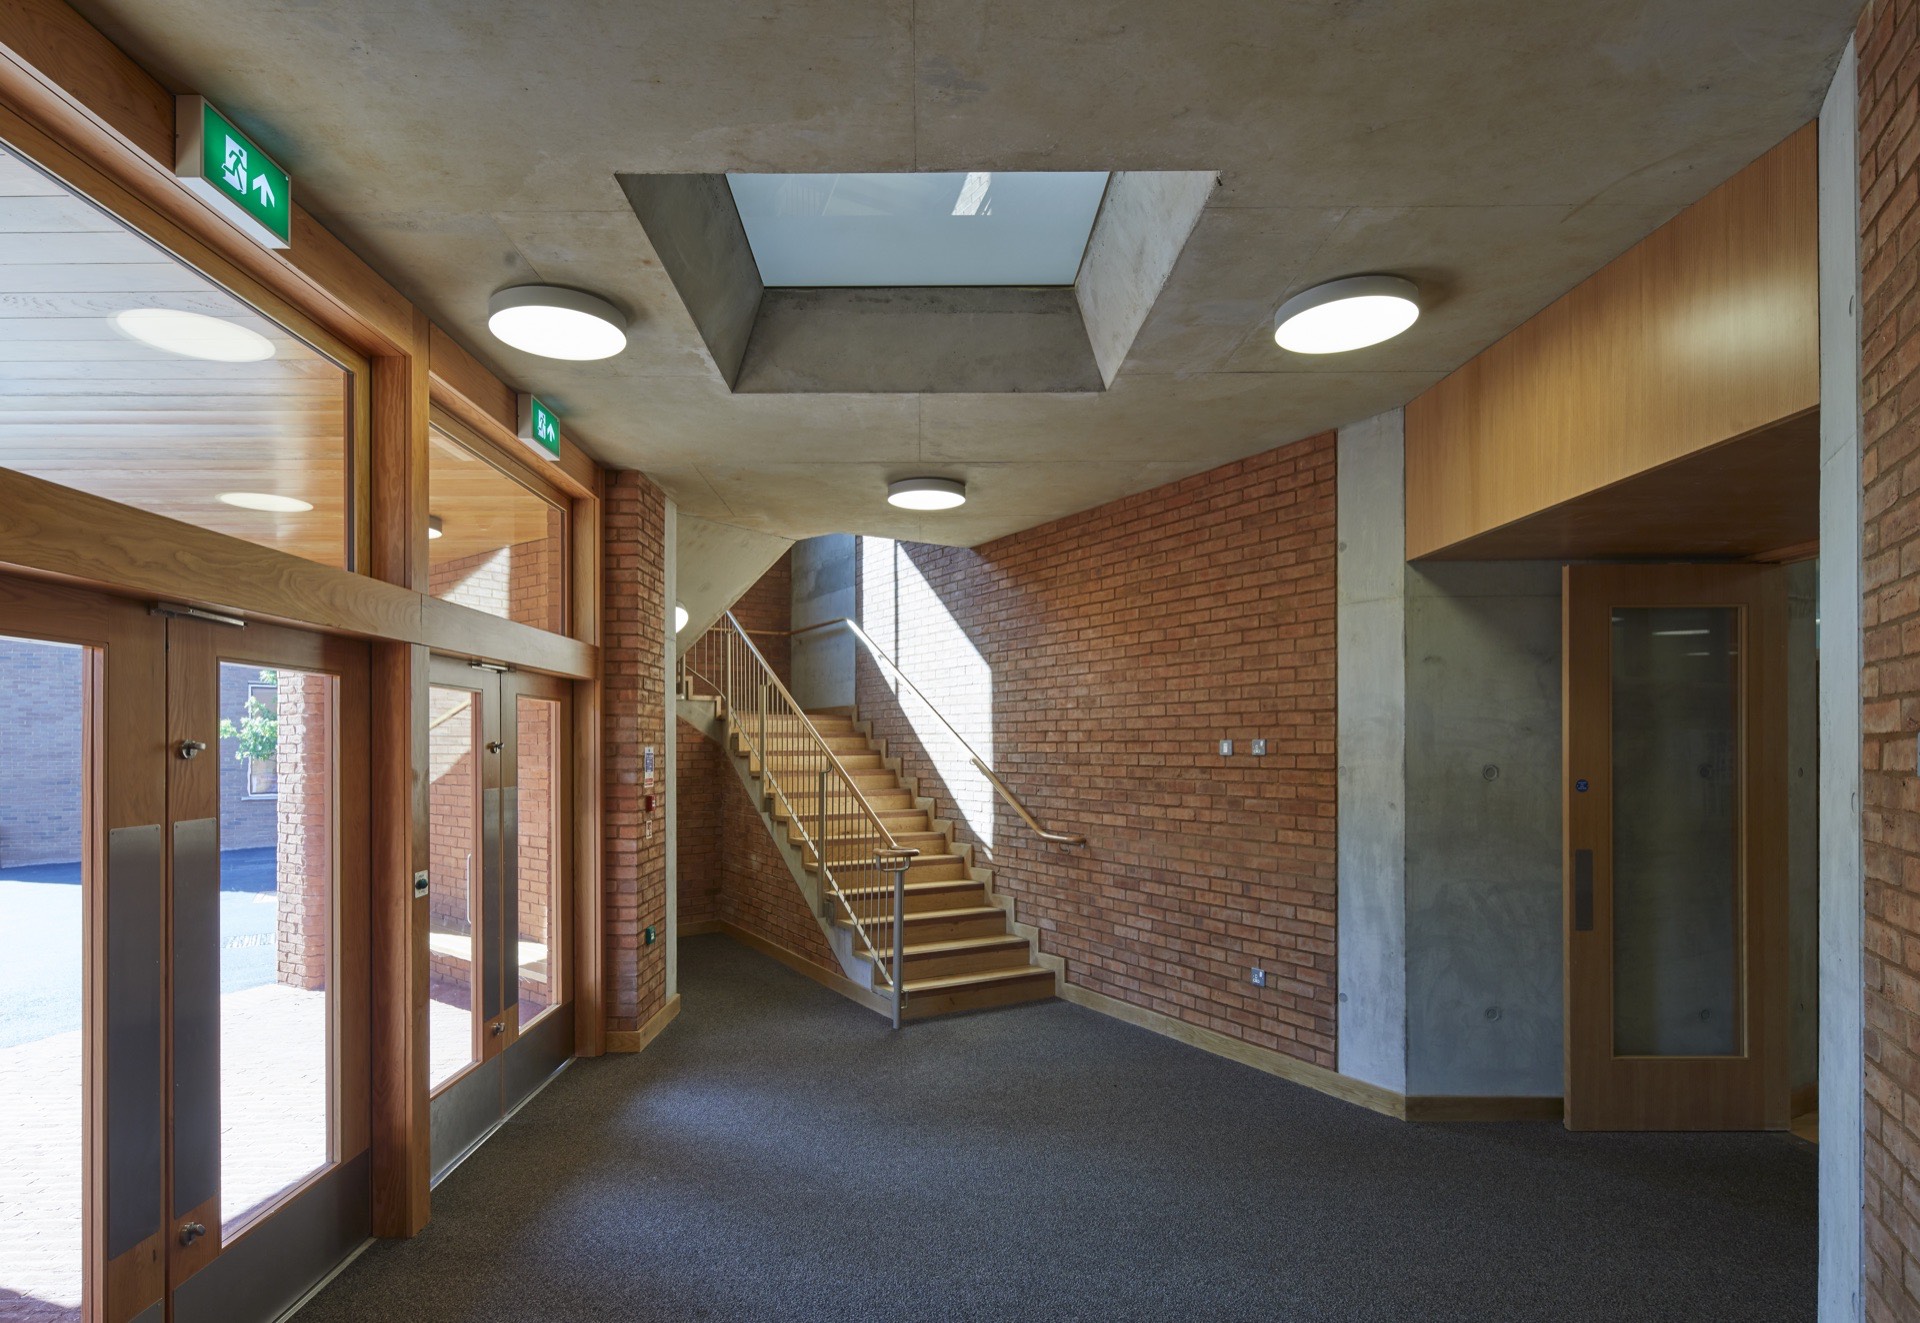 Alleyn'sSchool by Tim Ronalds photographed by Paul Riddle